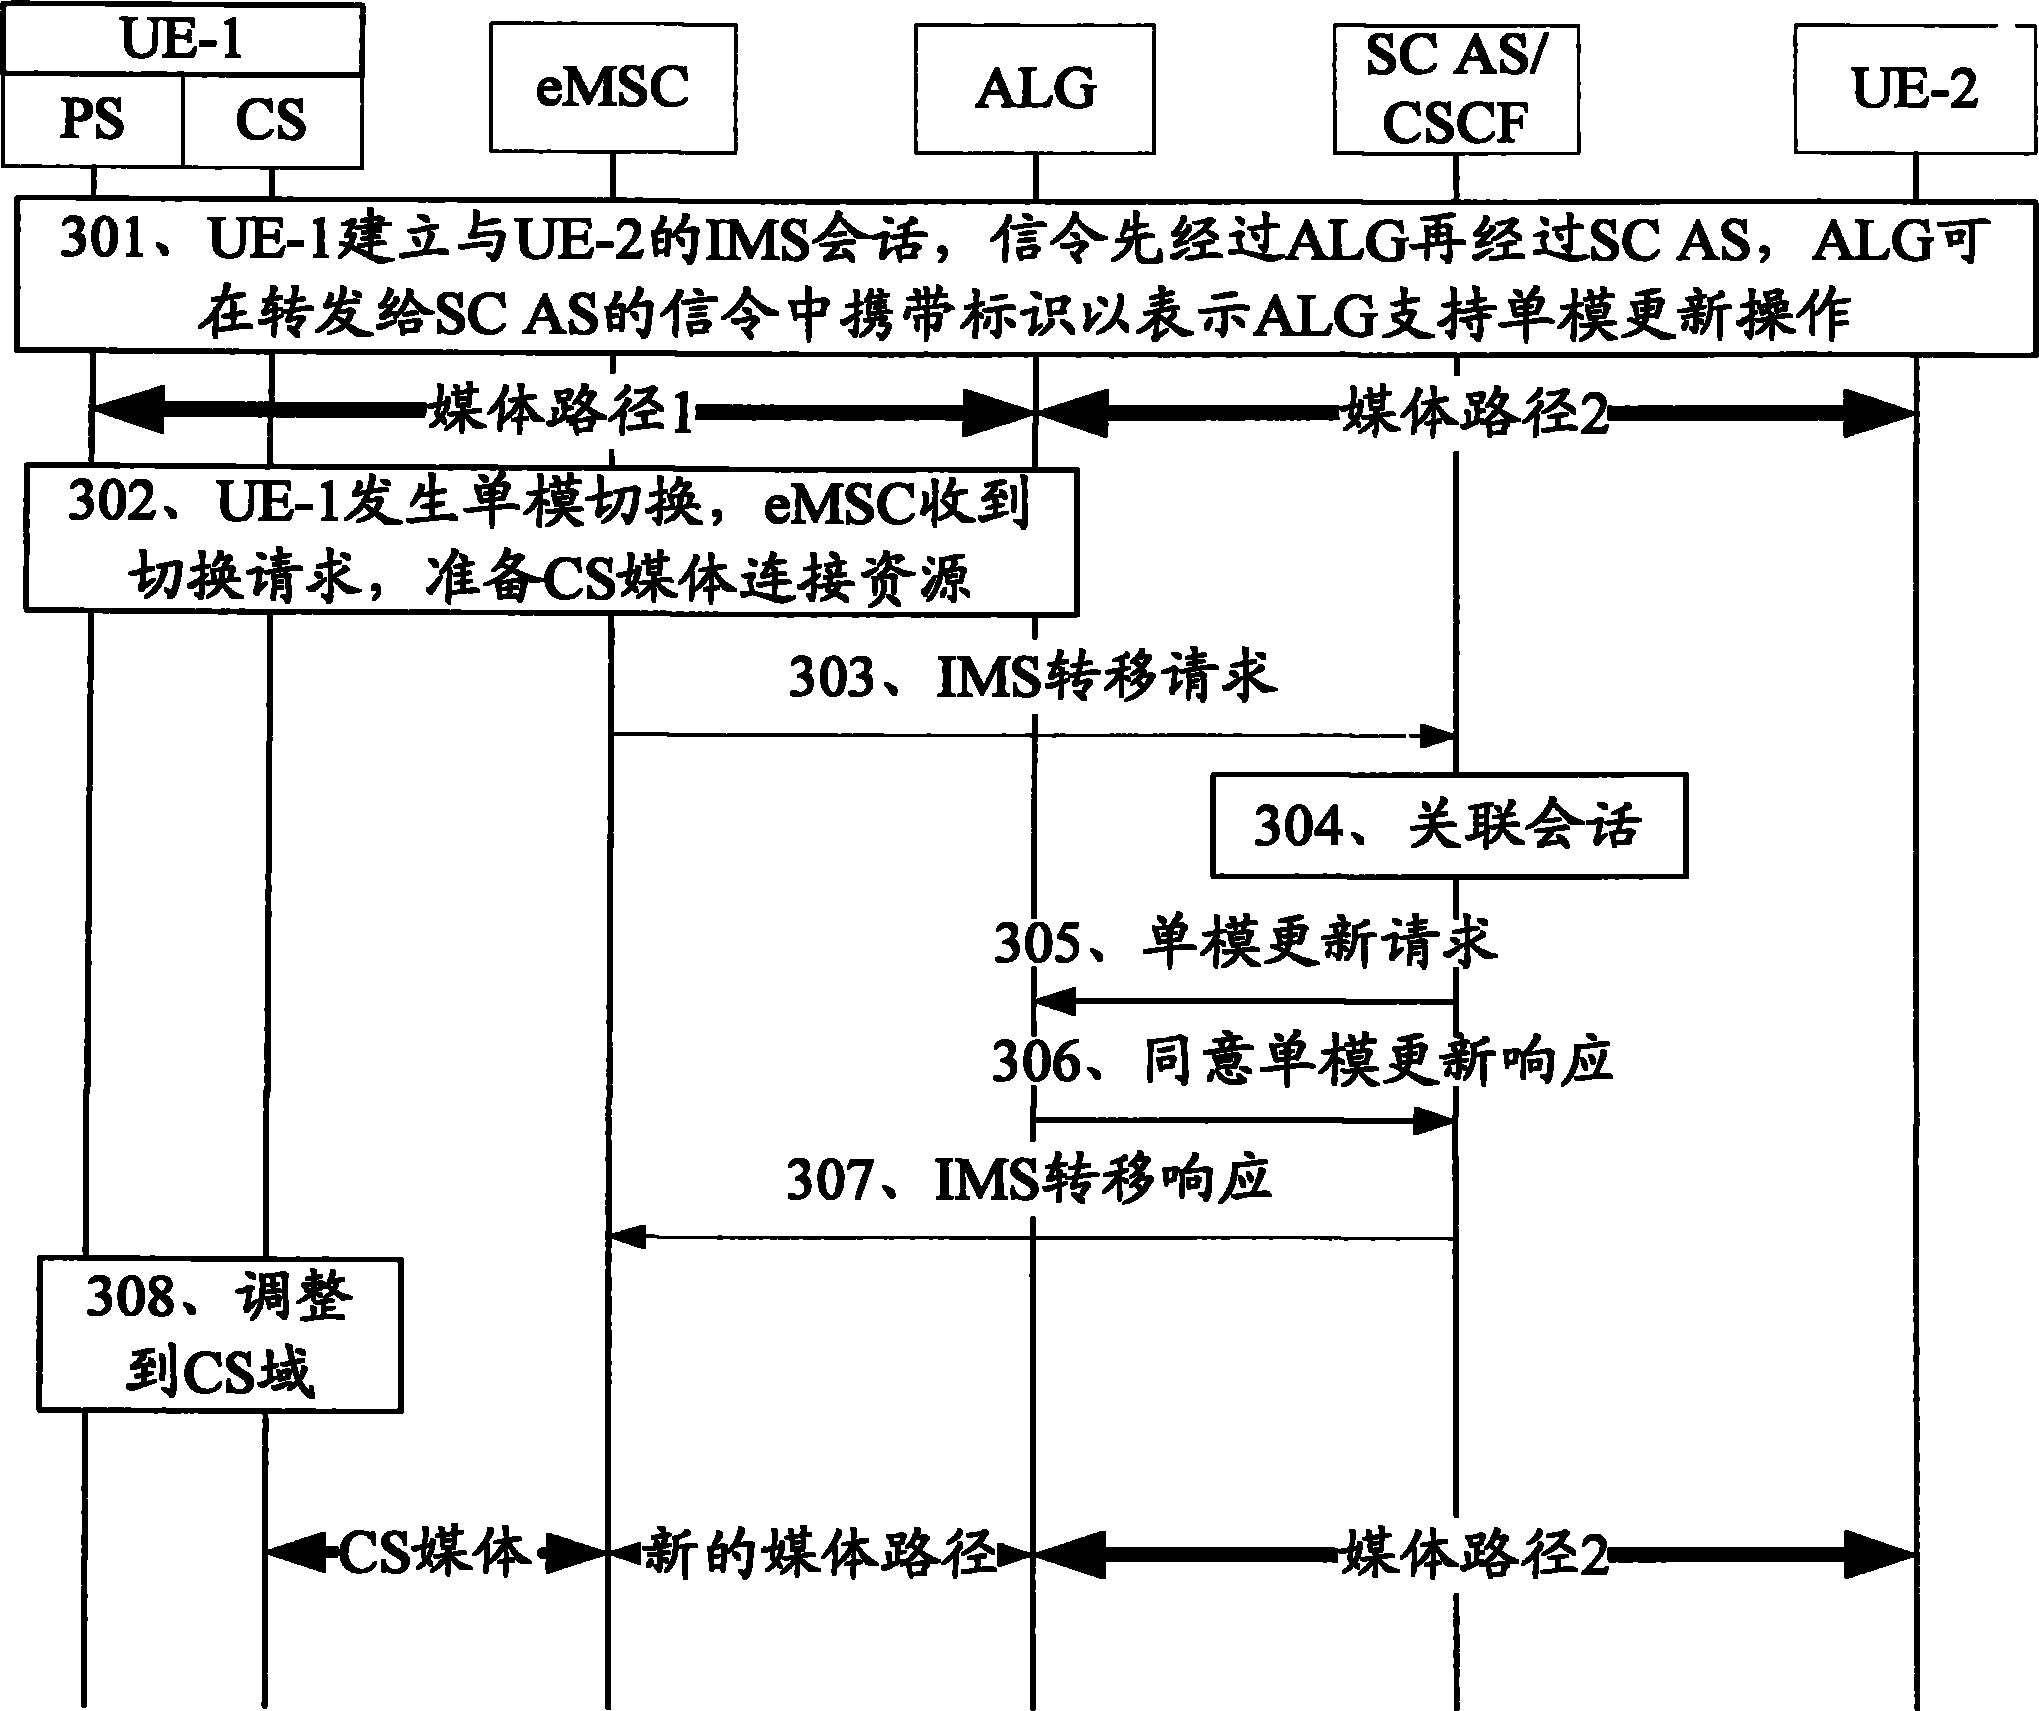 Method and system for realizing single radio voice call continuity (SRVCC)